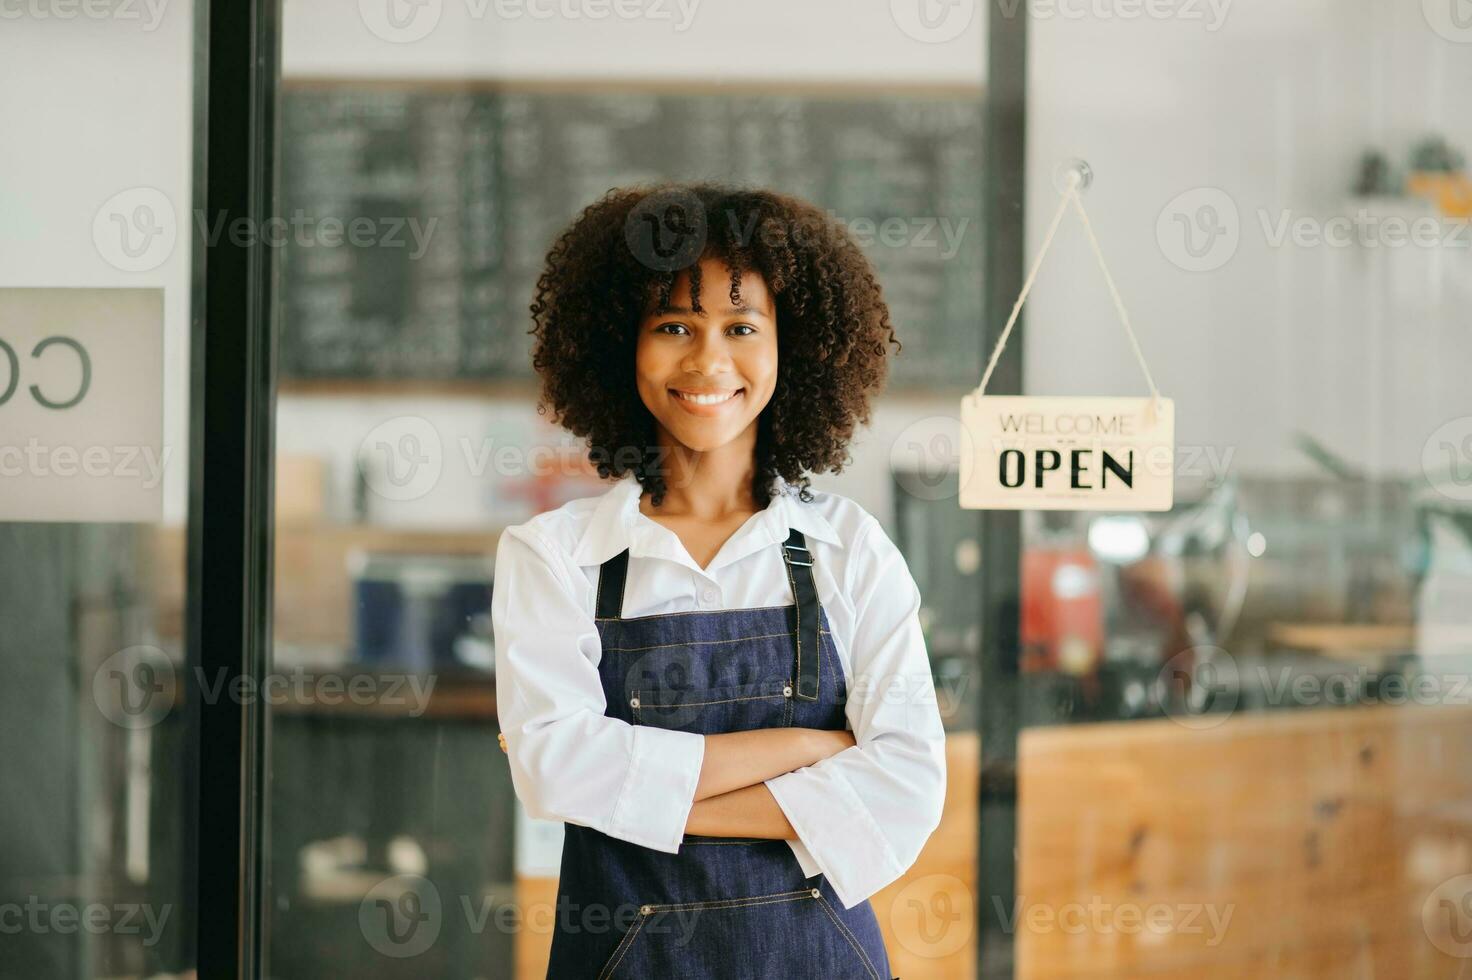 Startup successful small business owner sme African woman stand with tablet  in cafe restaurant. woman barista cafe owner. photo